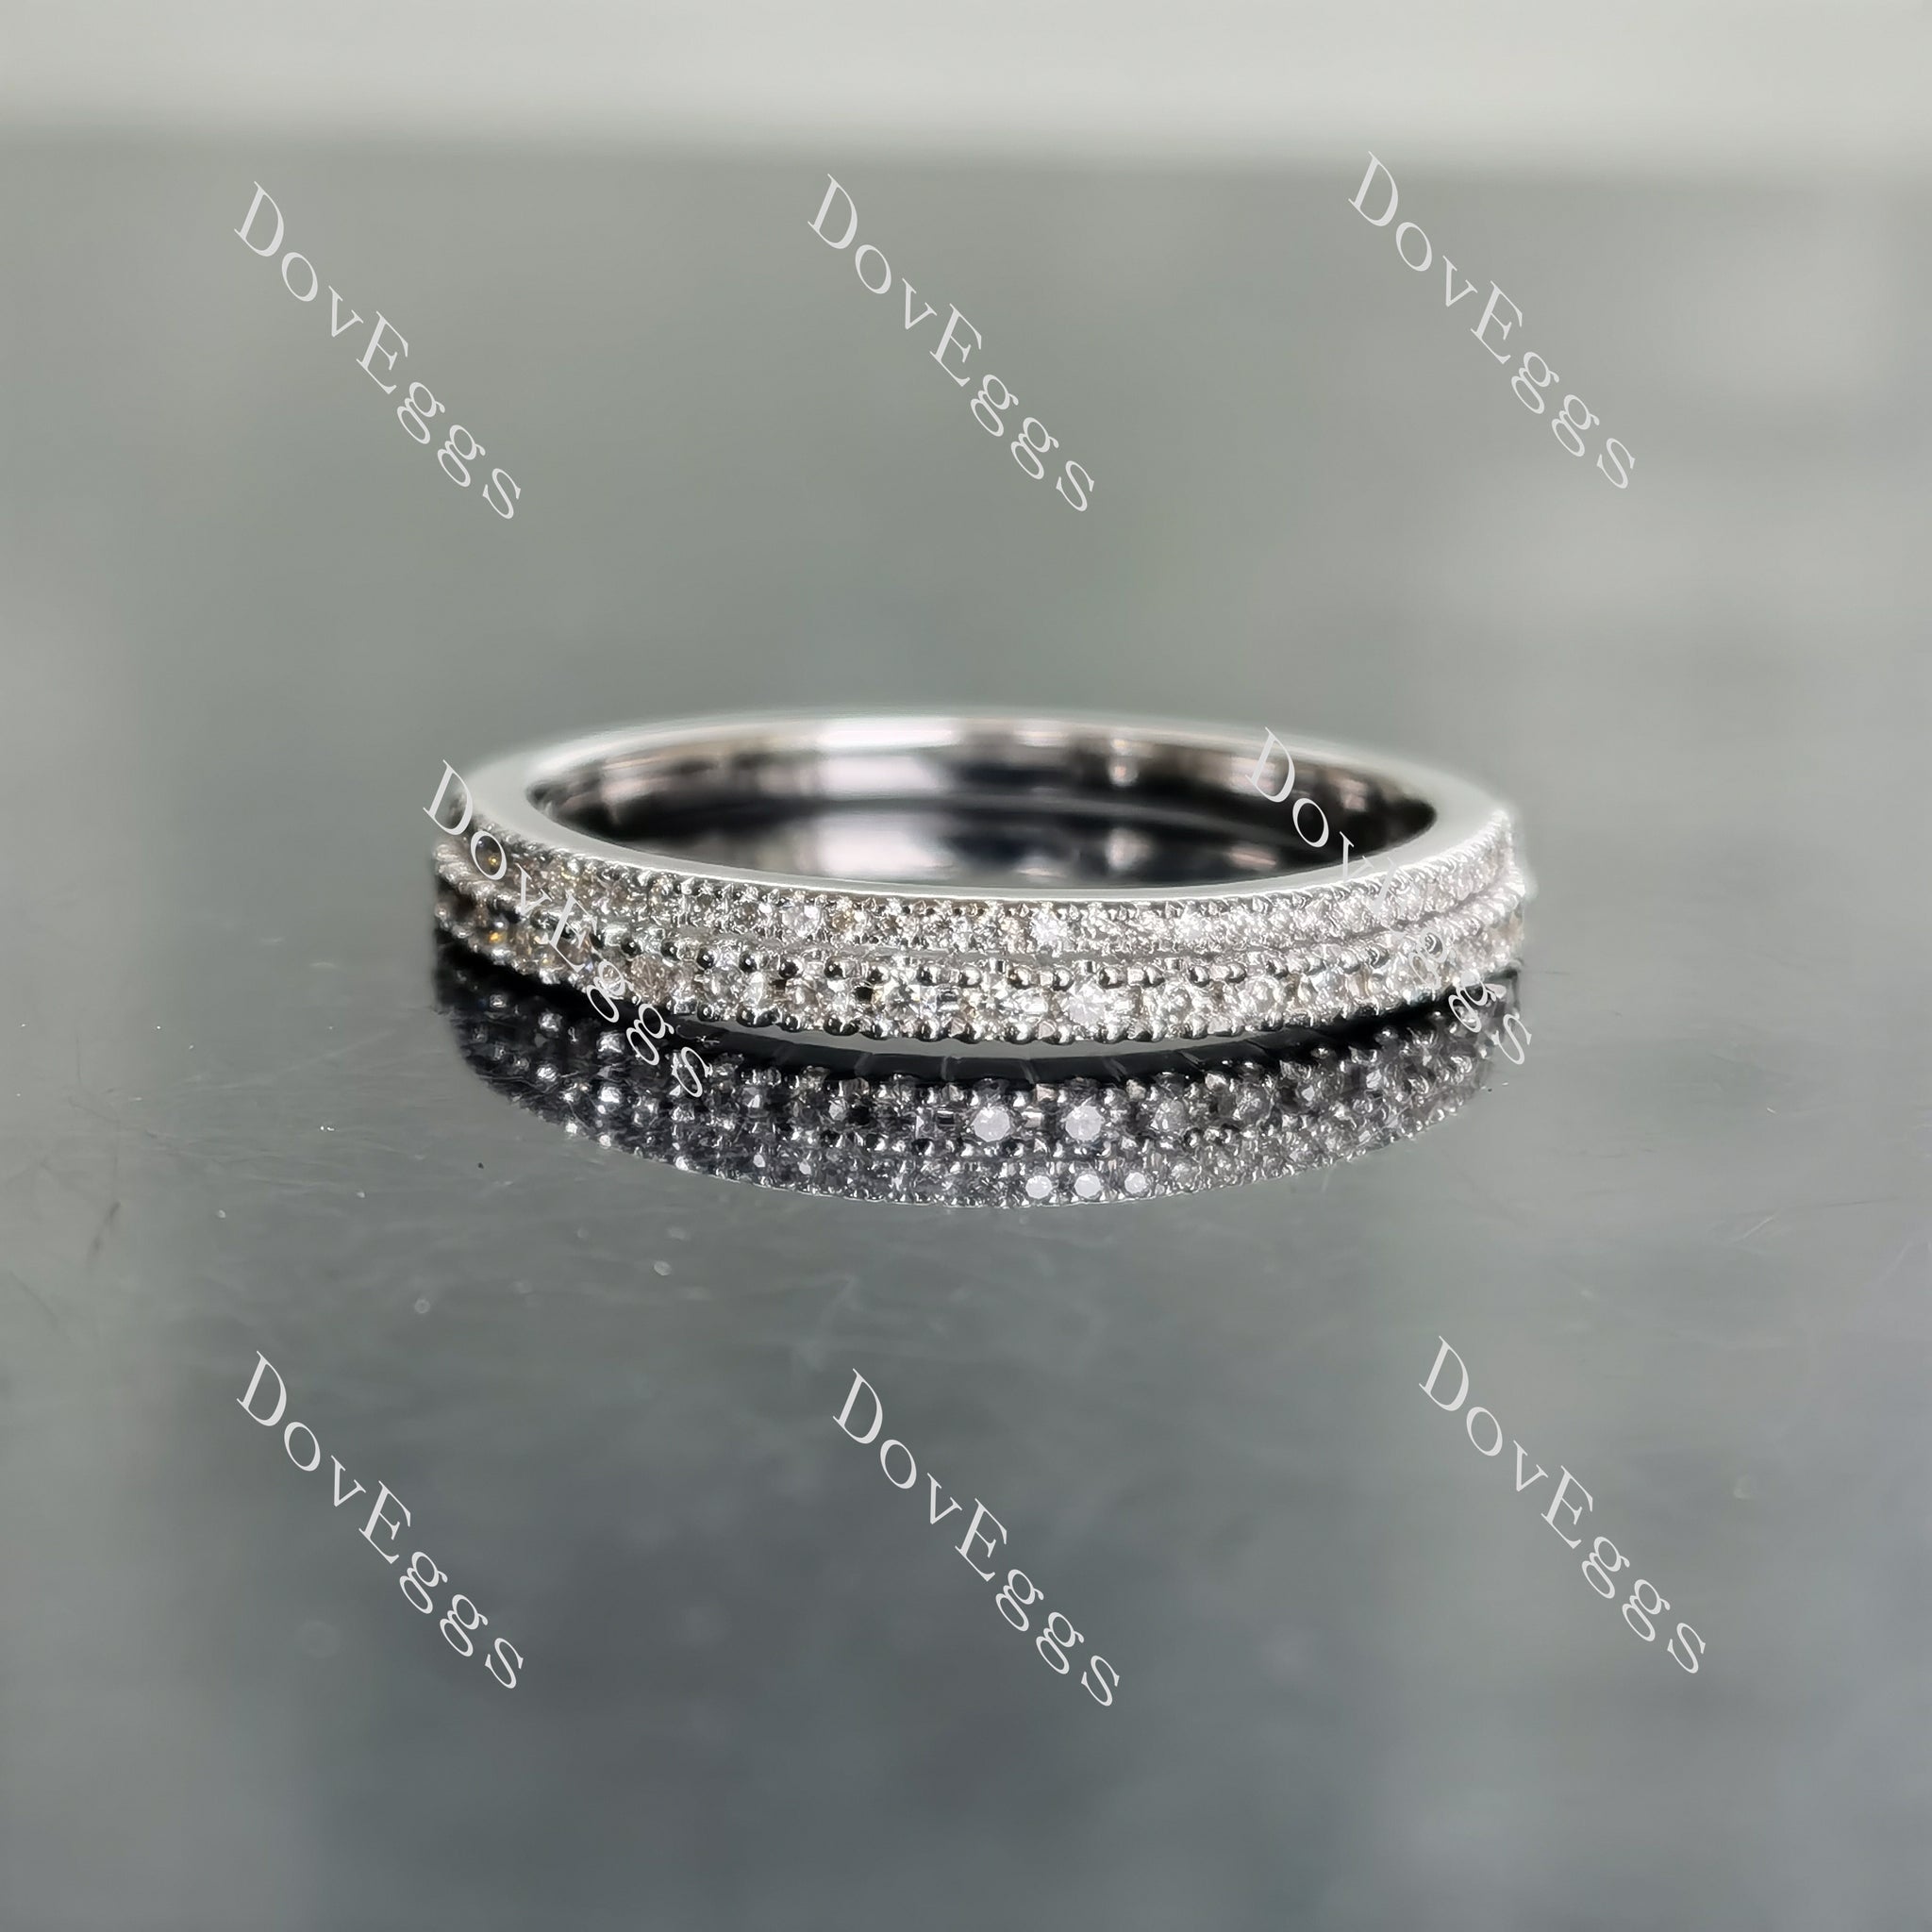 Doveggs round two pave moissanite wedding band-2.1mm band width